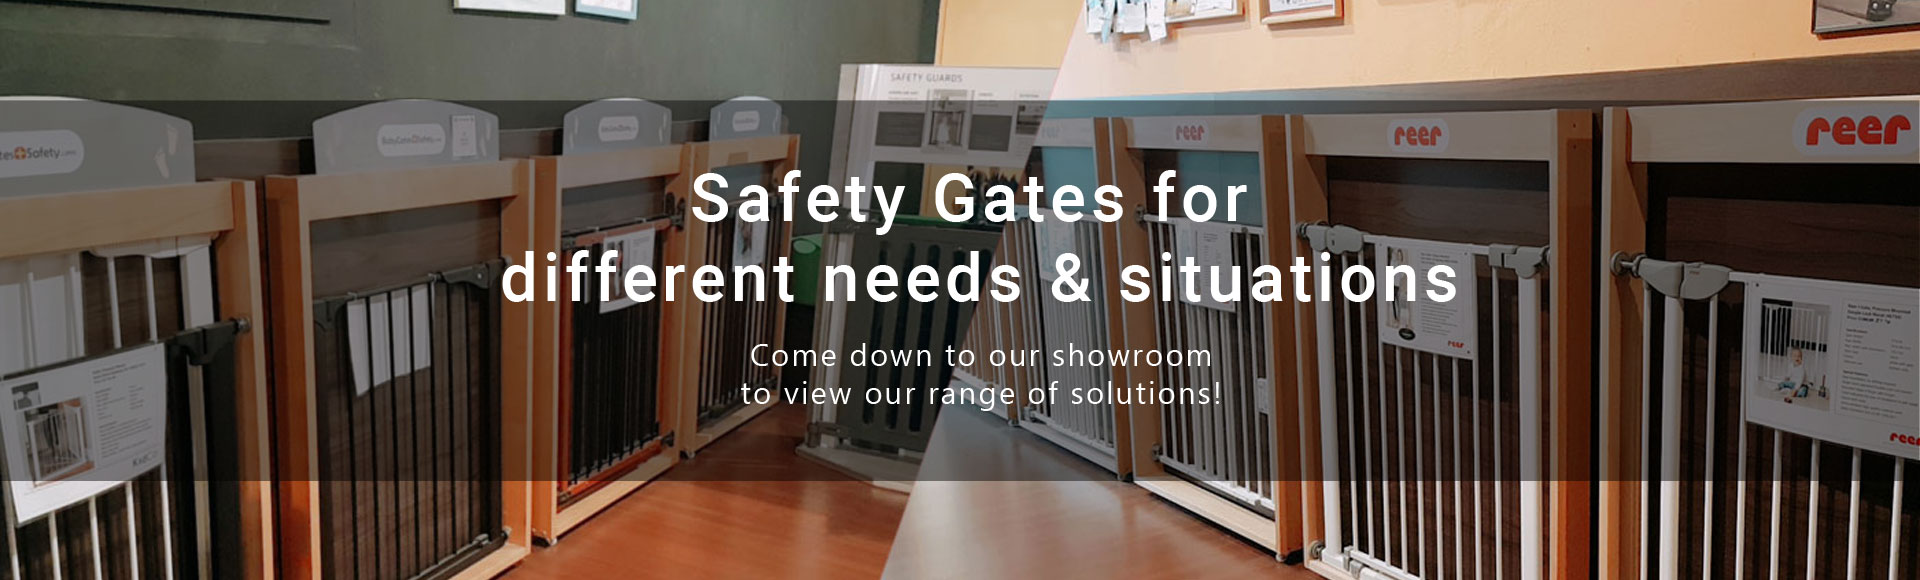 Safety Gates and Fences